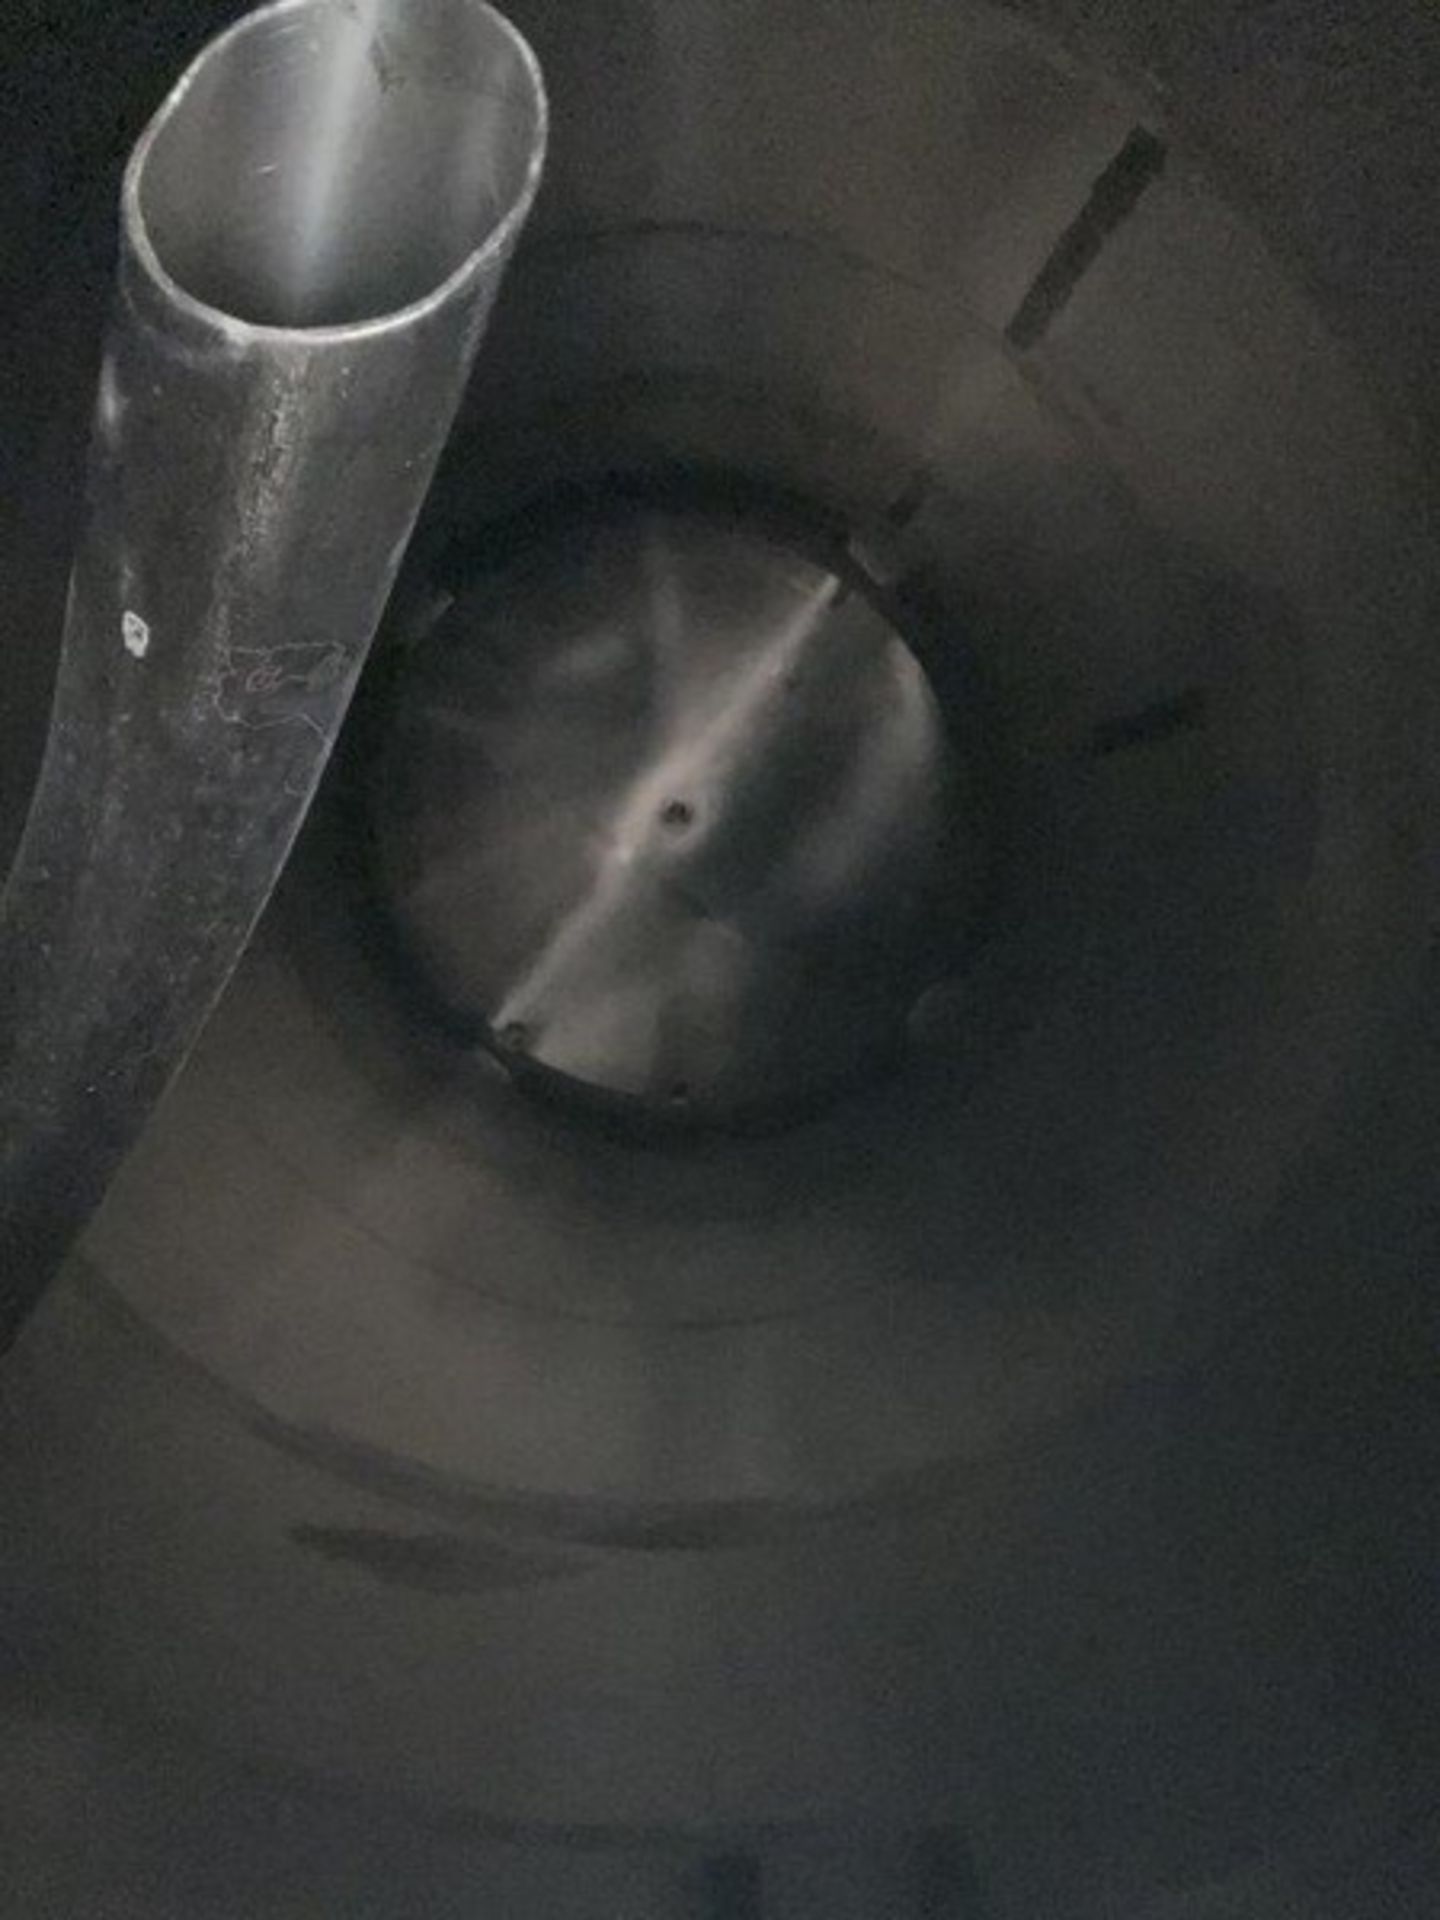 200 BBL Vertical Cone Bottom 304 Stainless Steel Jacketed Vessel. Manufactured by JV Northwest (ICC) - Image 5 of 5